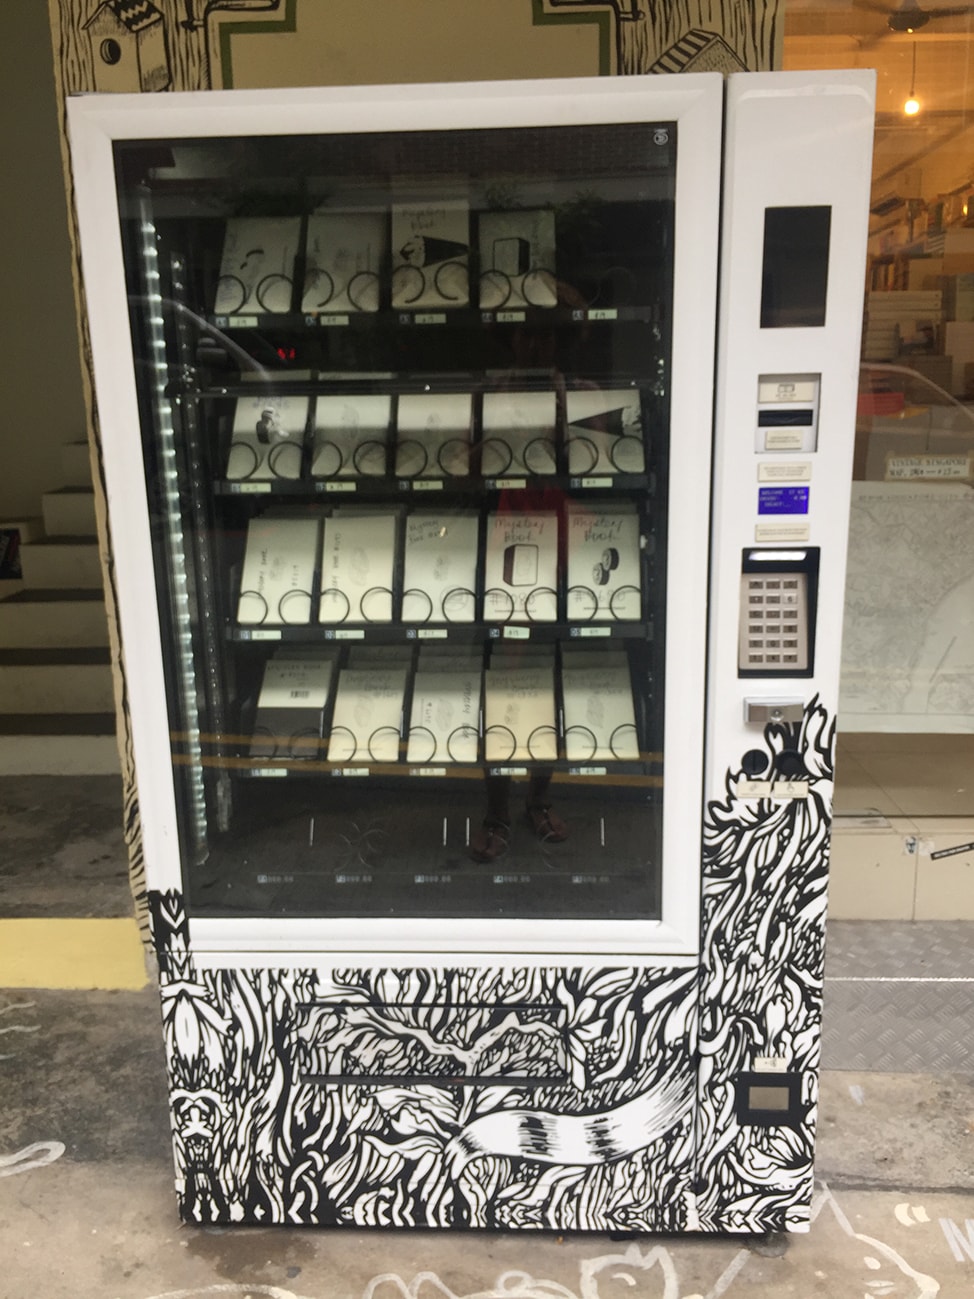 Nifty book vending machine outside of Books Actually